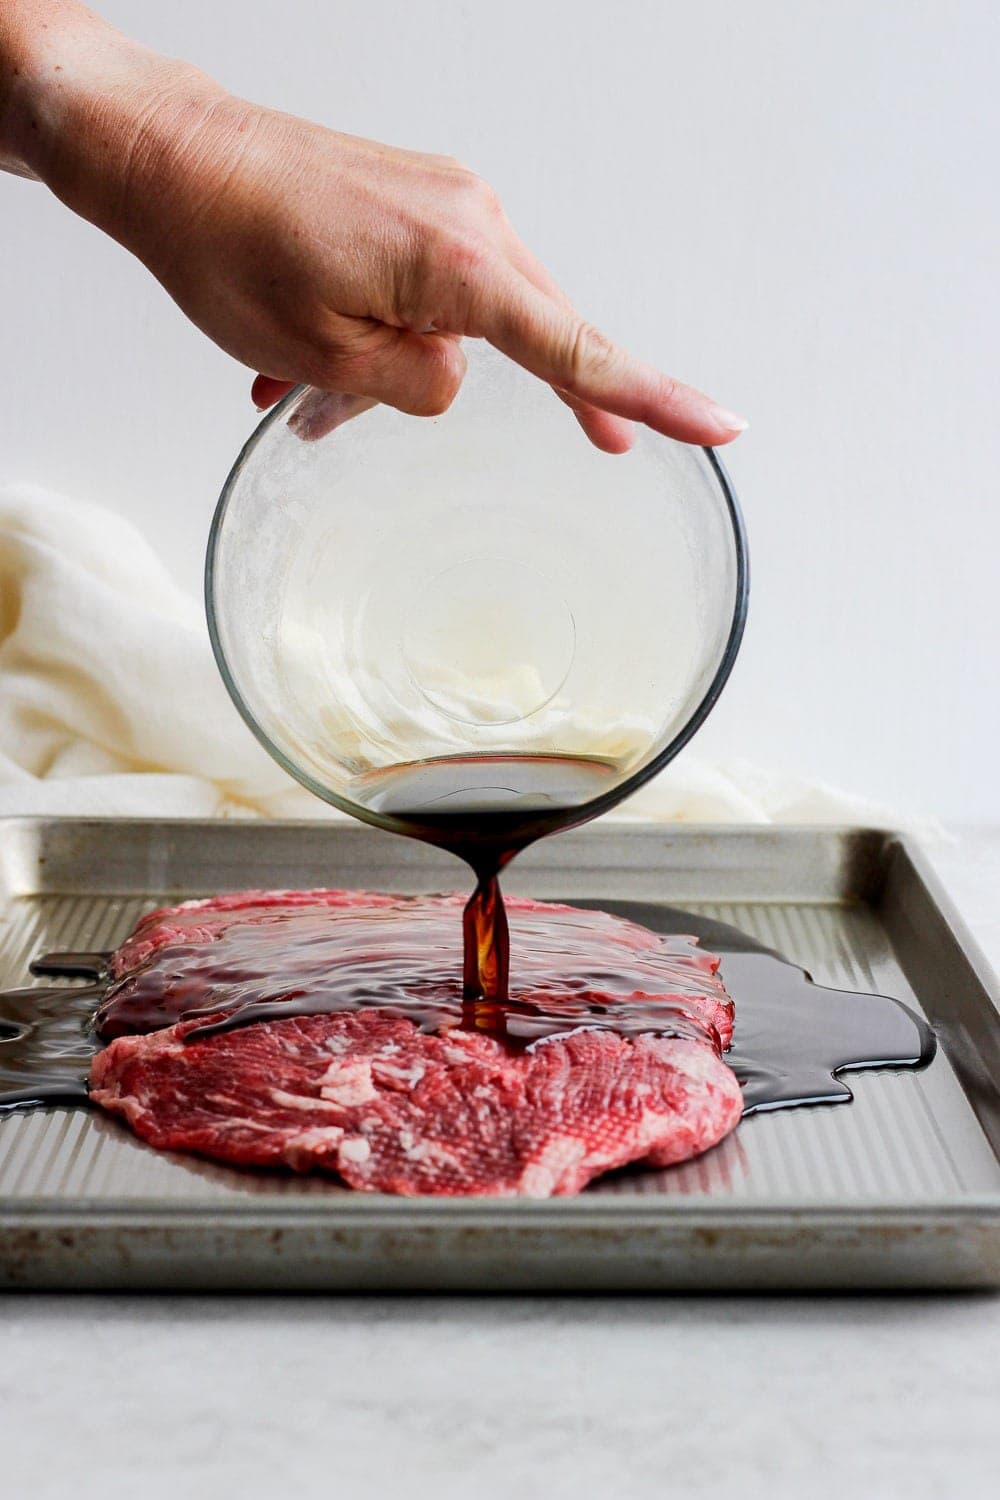 Pour the marinade over the flank steak.